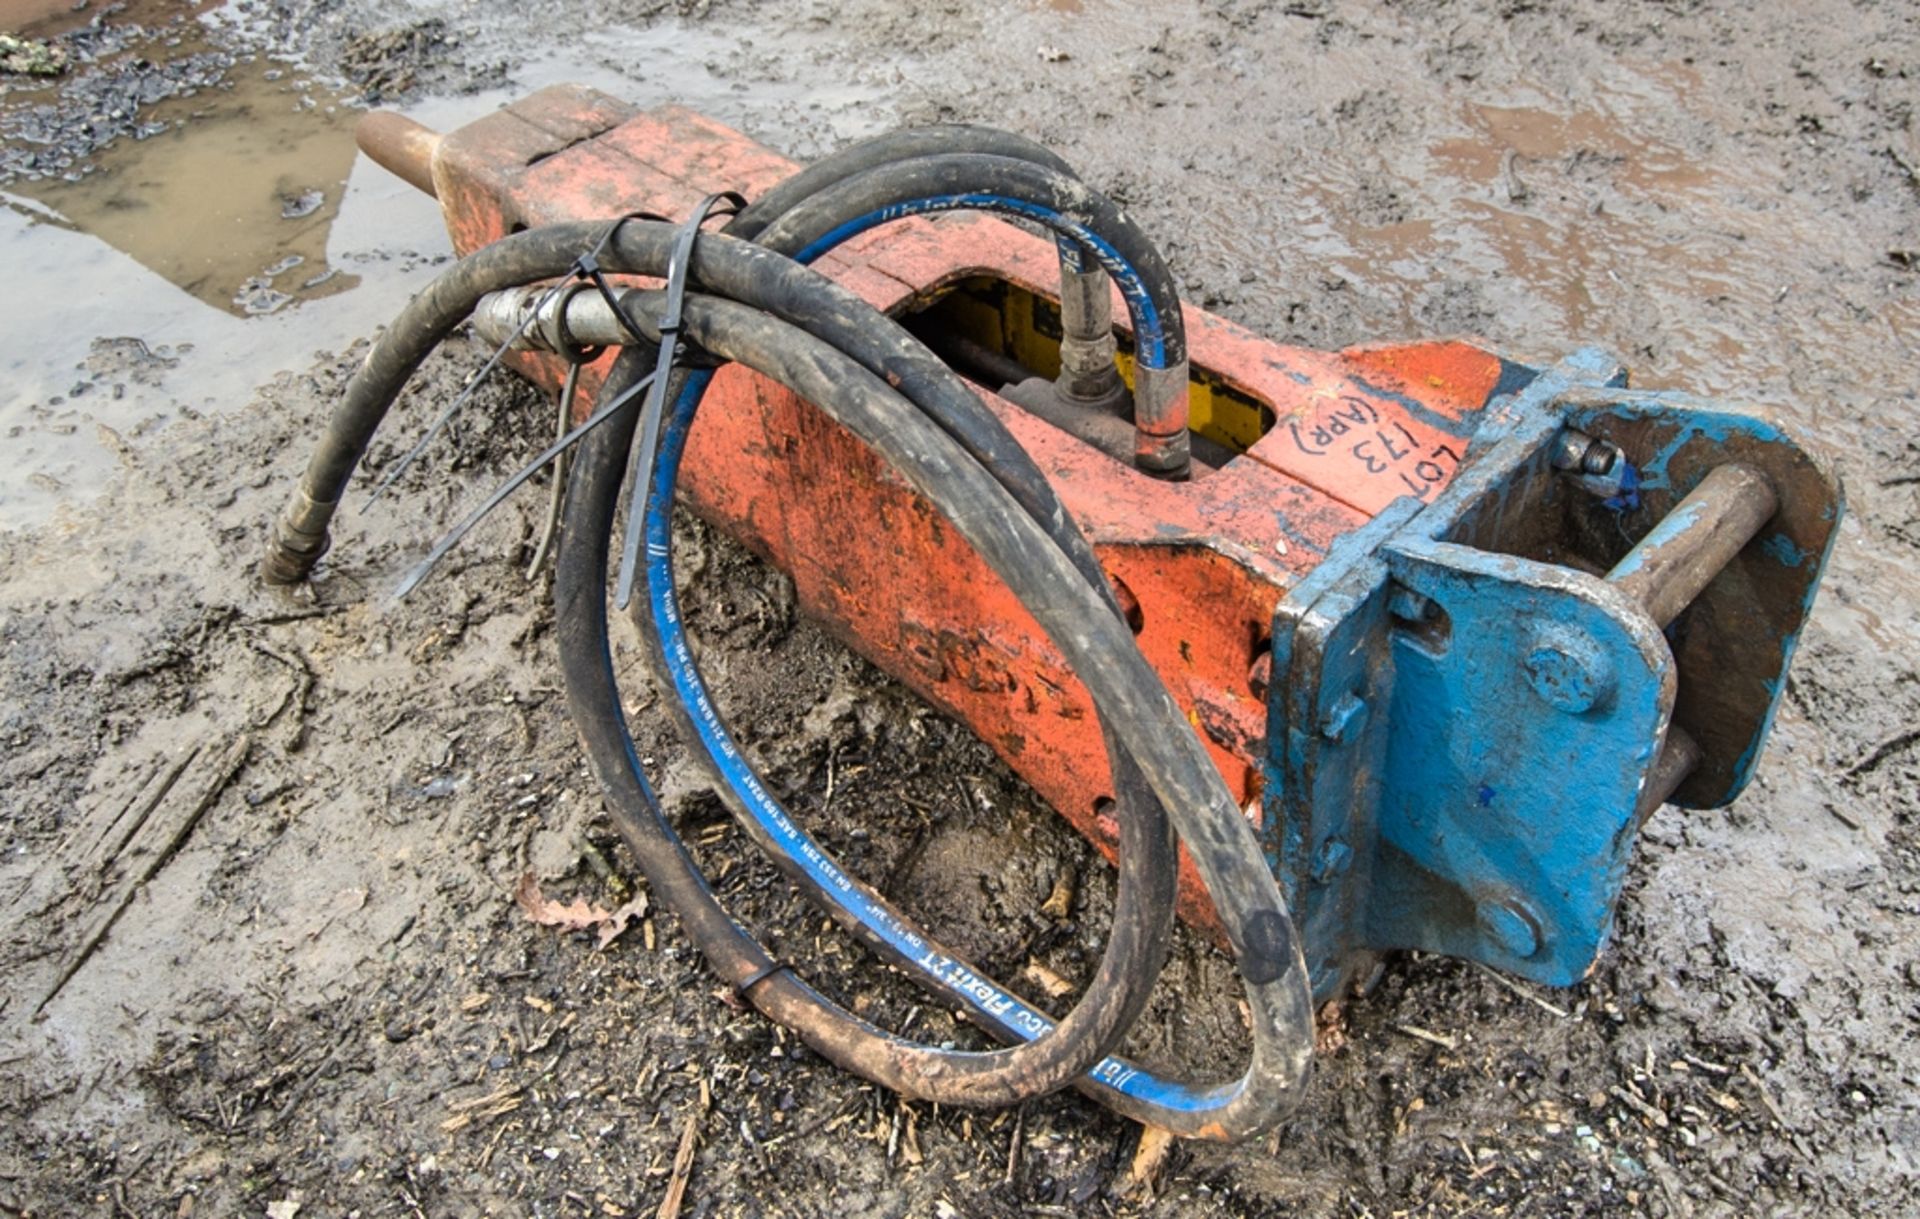 Indeco hydraulic breaker to suit excavator Pin diameter: 35mm Pin centres: 190mm Pin width: 140mm - Image 2 of 4